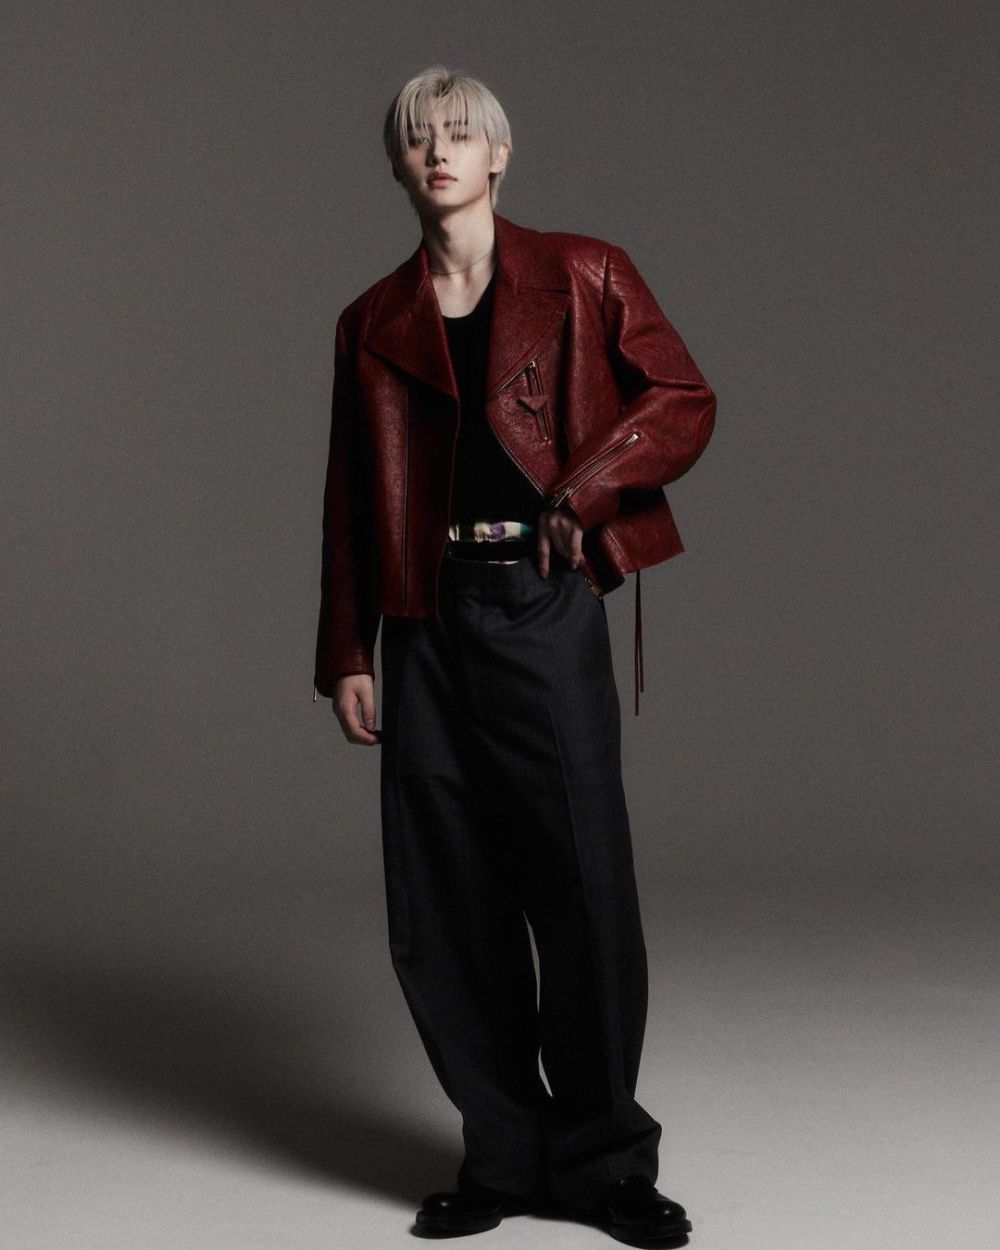 8 Ide Outfit Smart Casual ala Sunghoon ENHYPEN, Stunning!